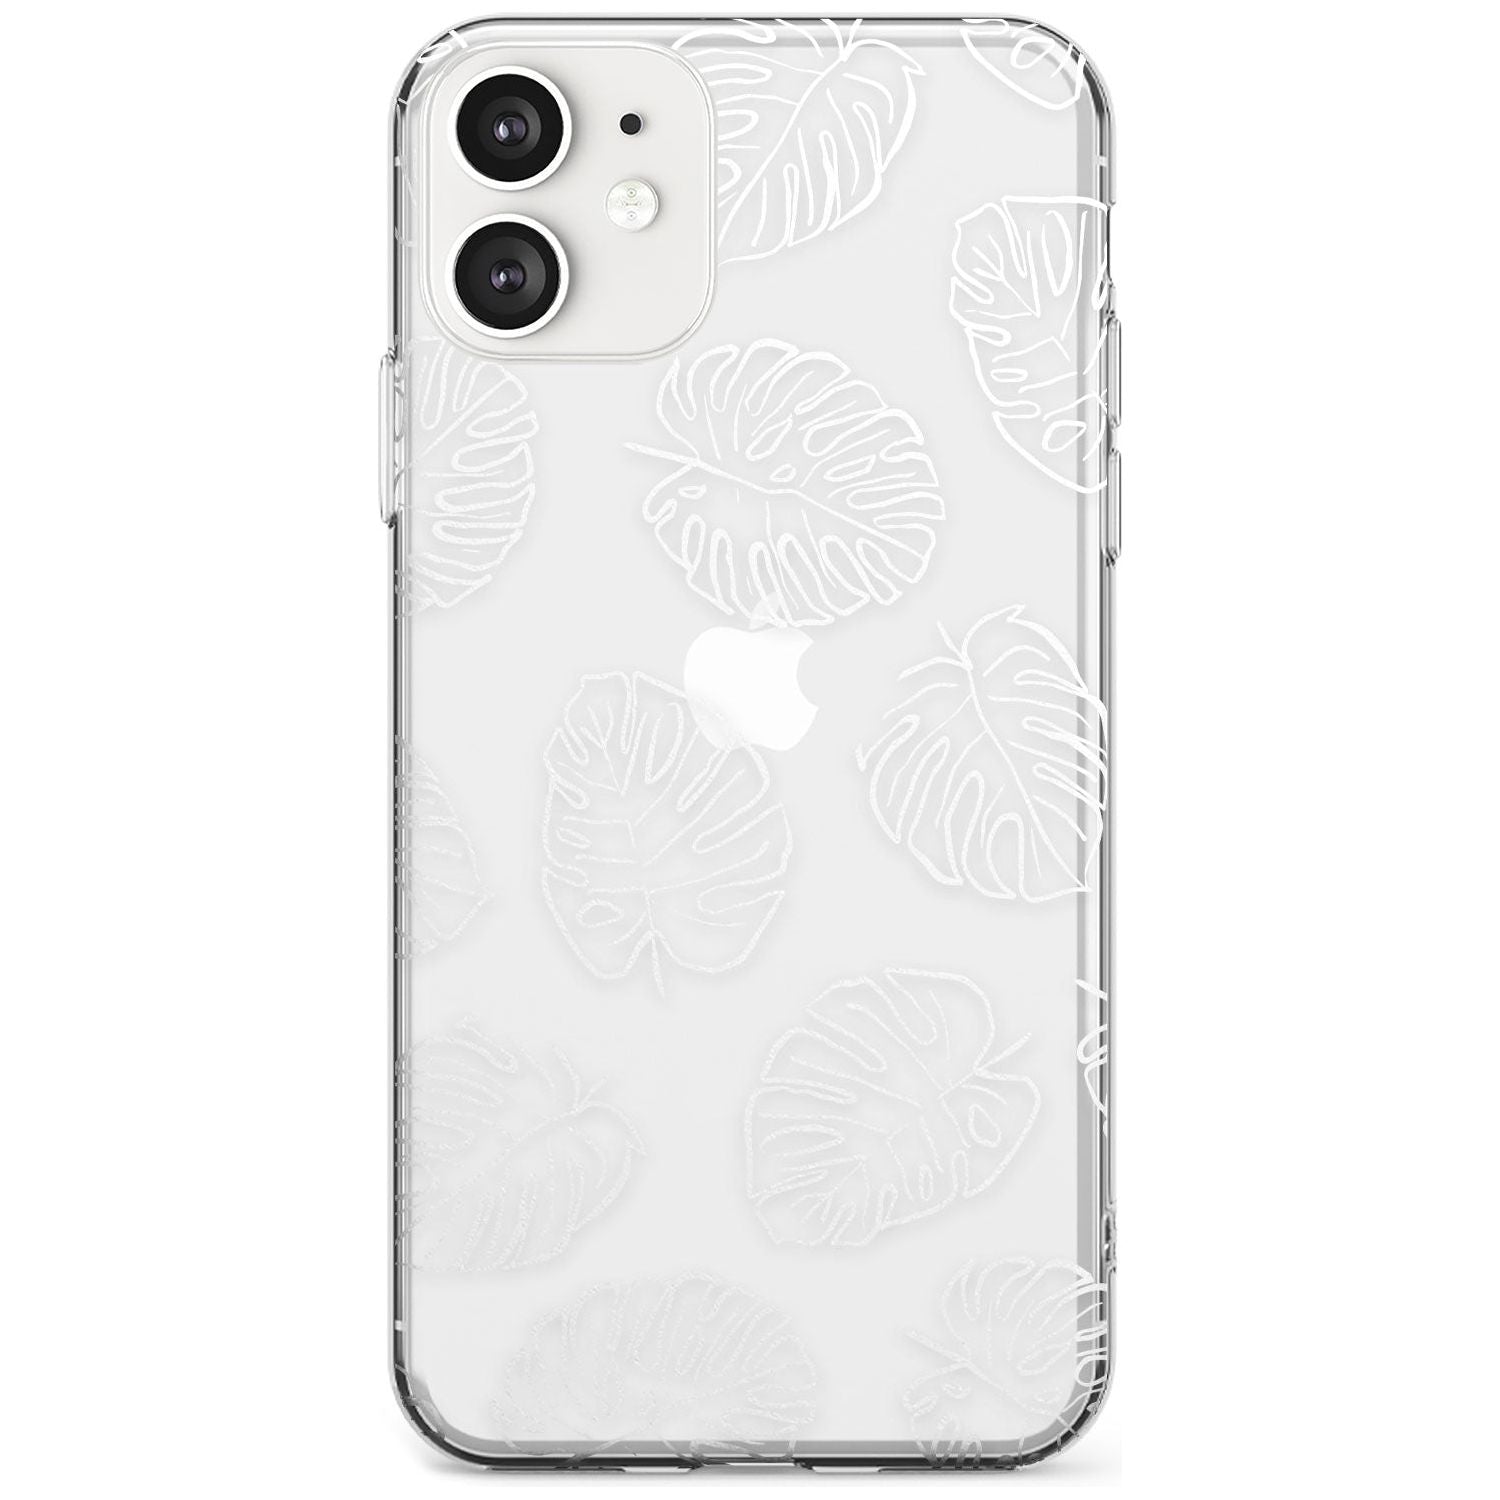 Monstera Leaves Black Impact Phone Case for iPhone 11